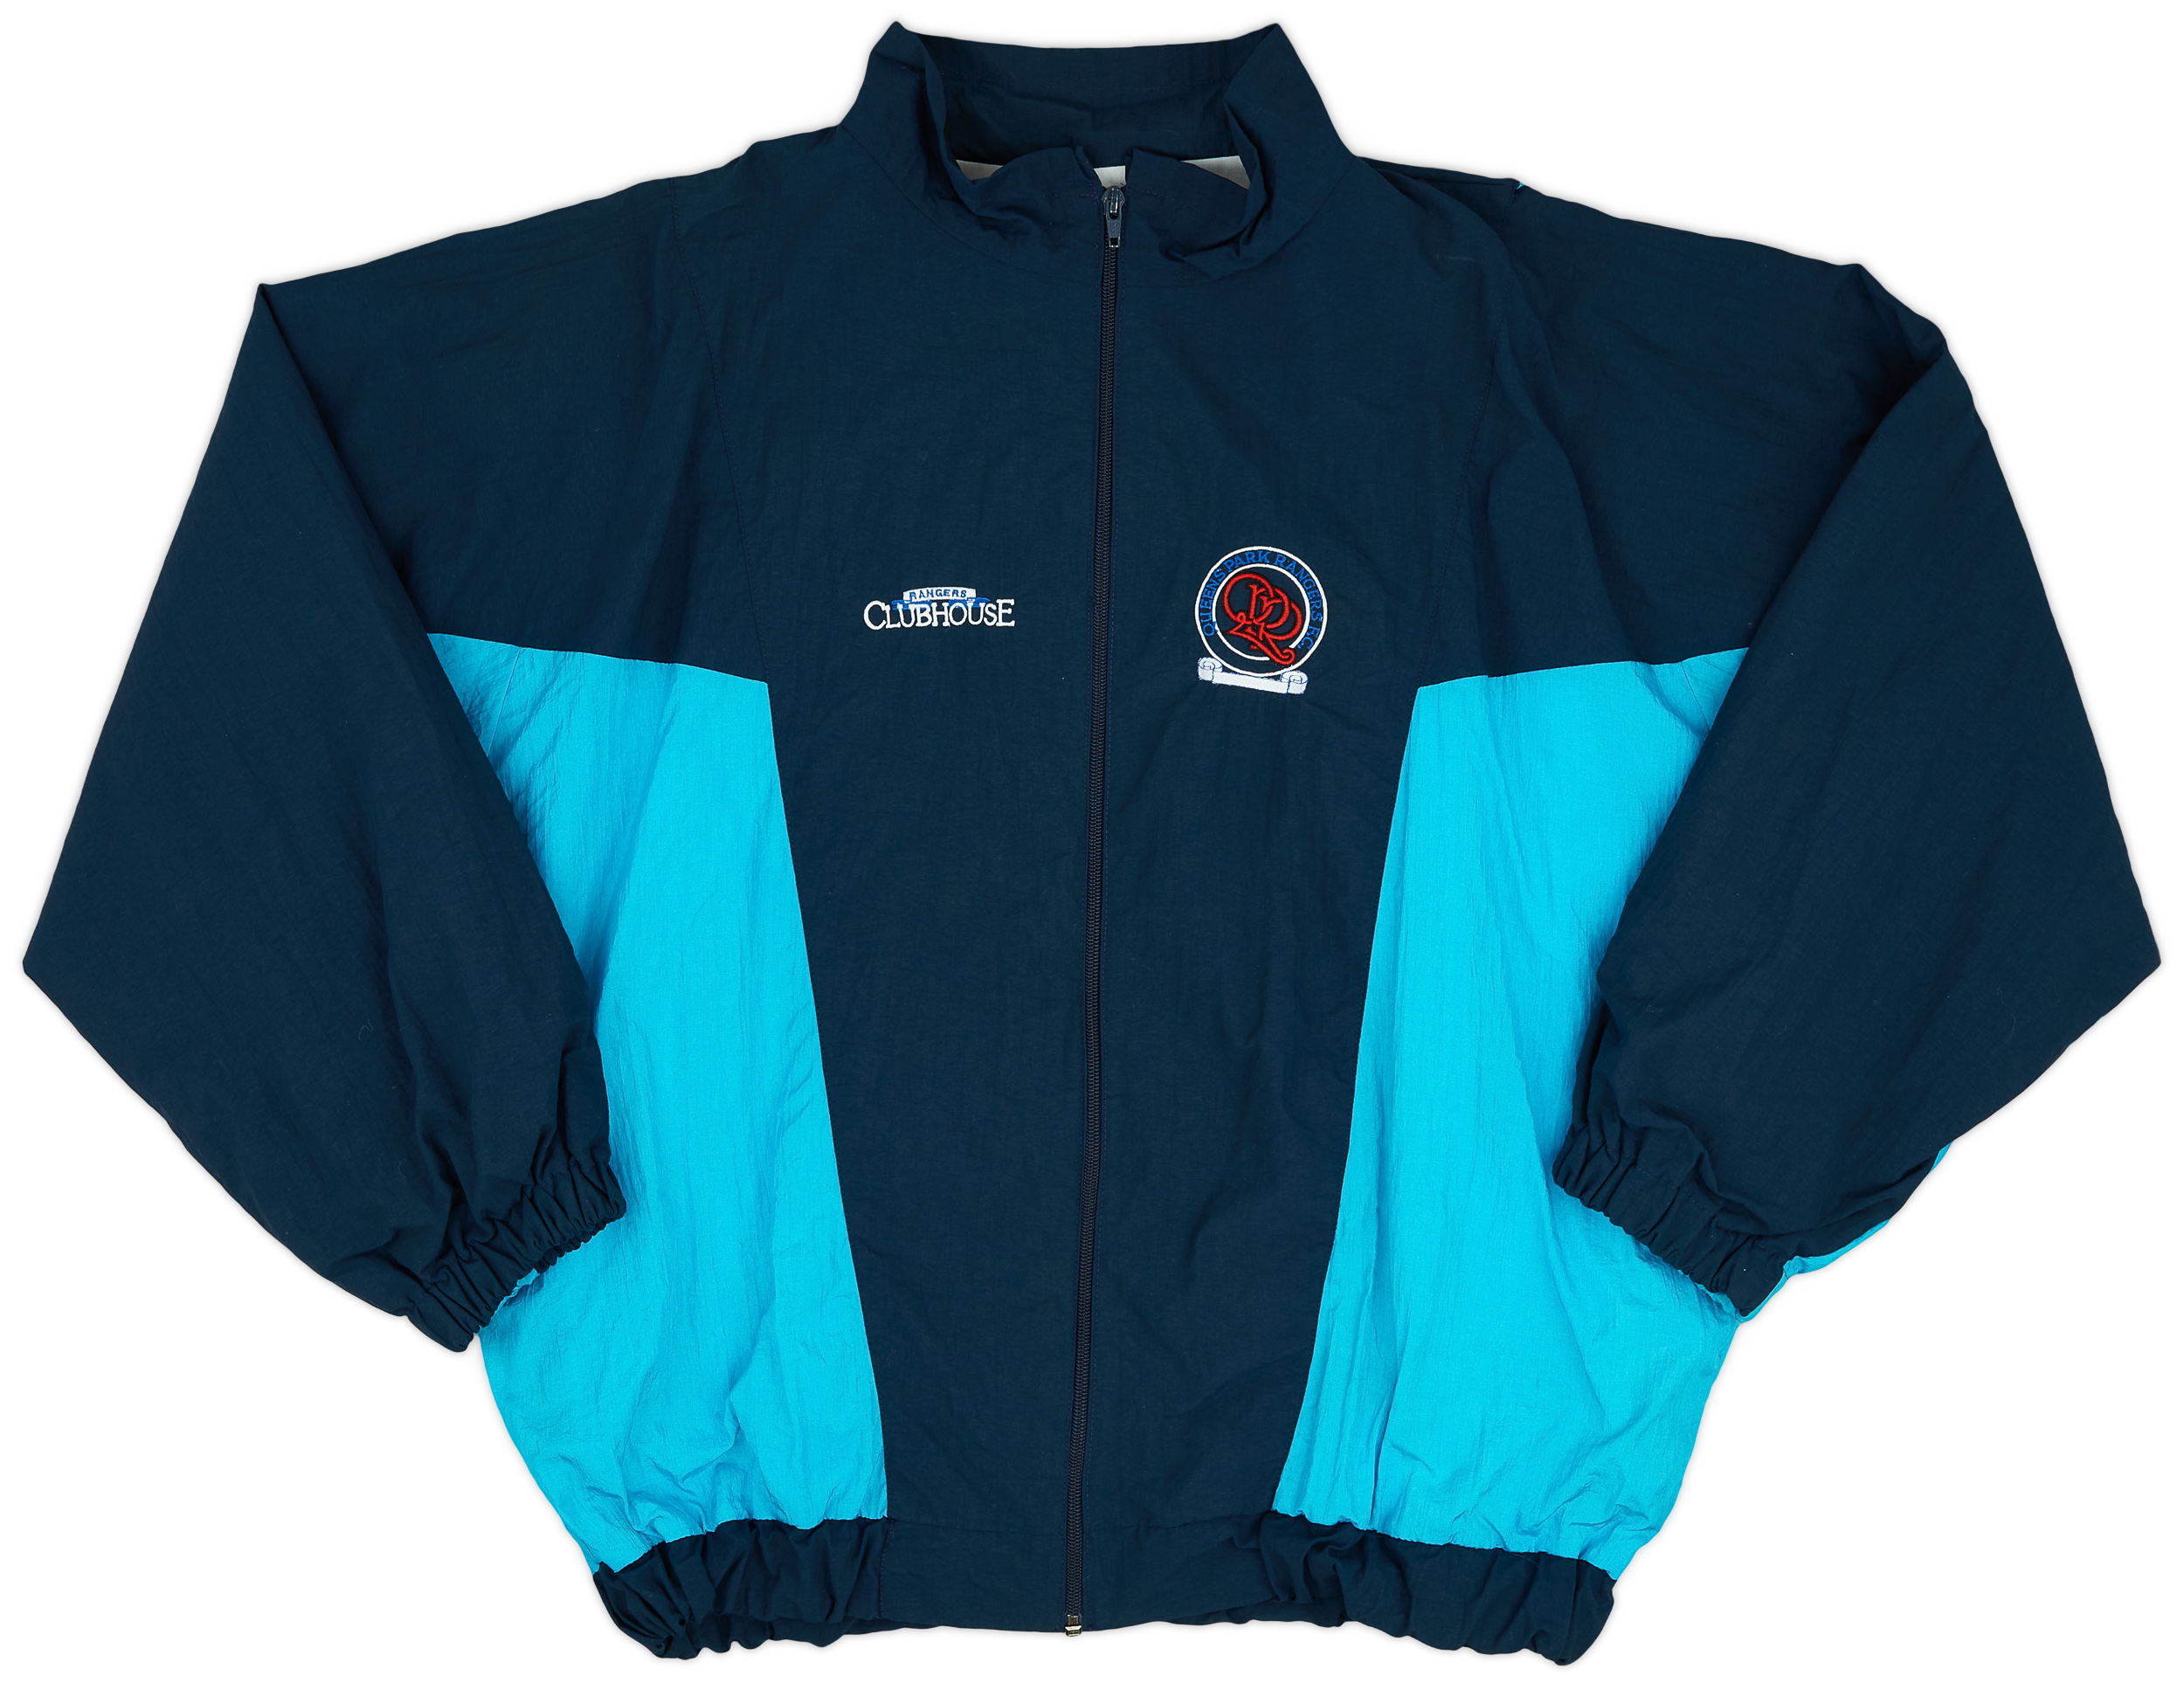 Clubhouse Jacket